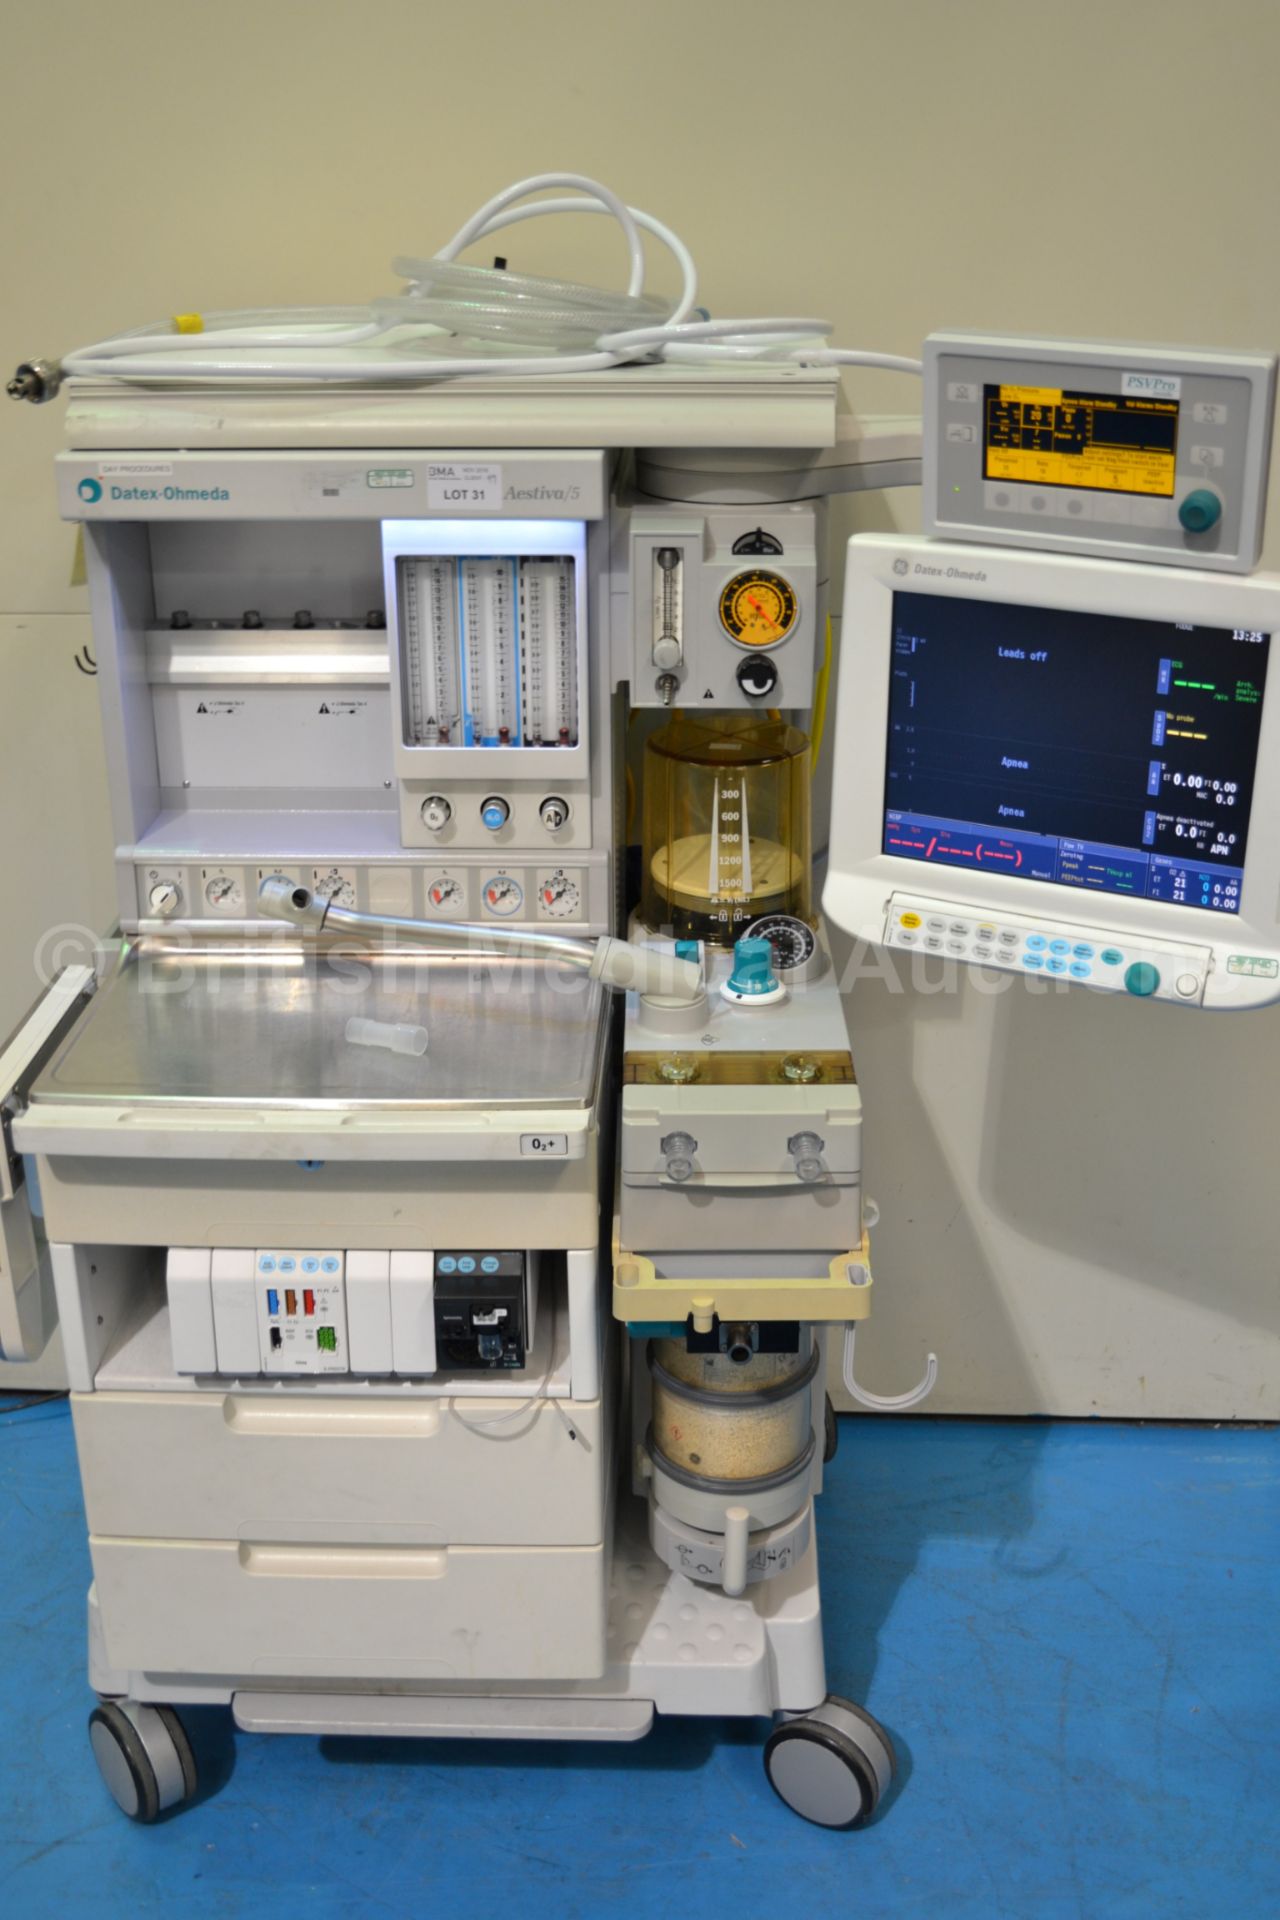 Datex Ohmeda Aestiva/5 Anaesthesia System with Aes - Image 2 of 7